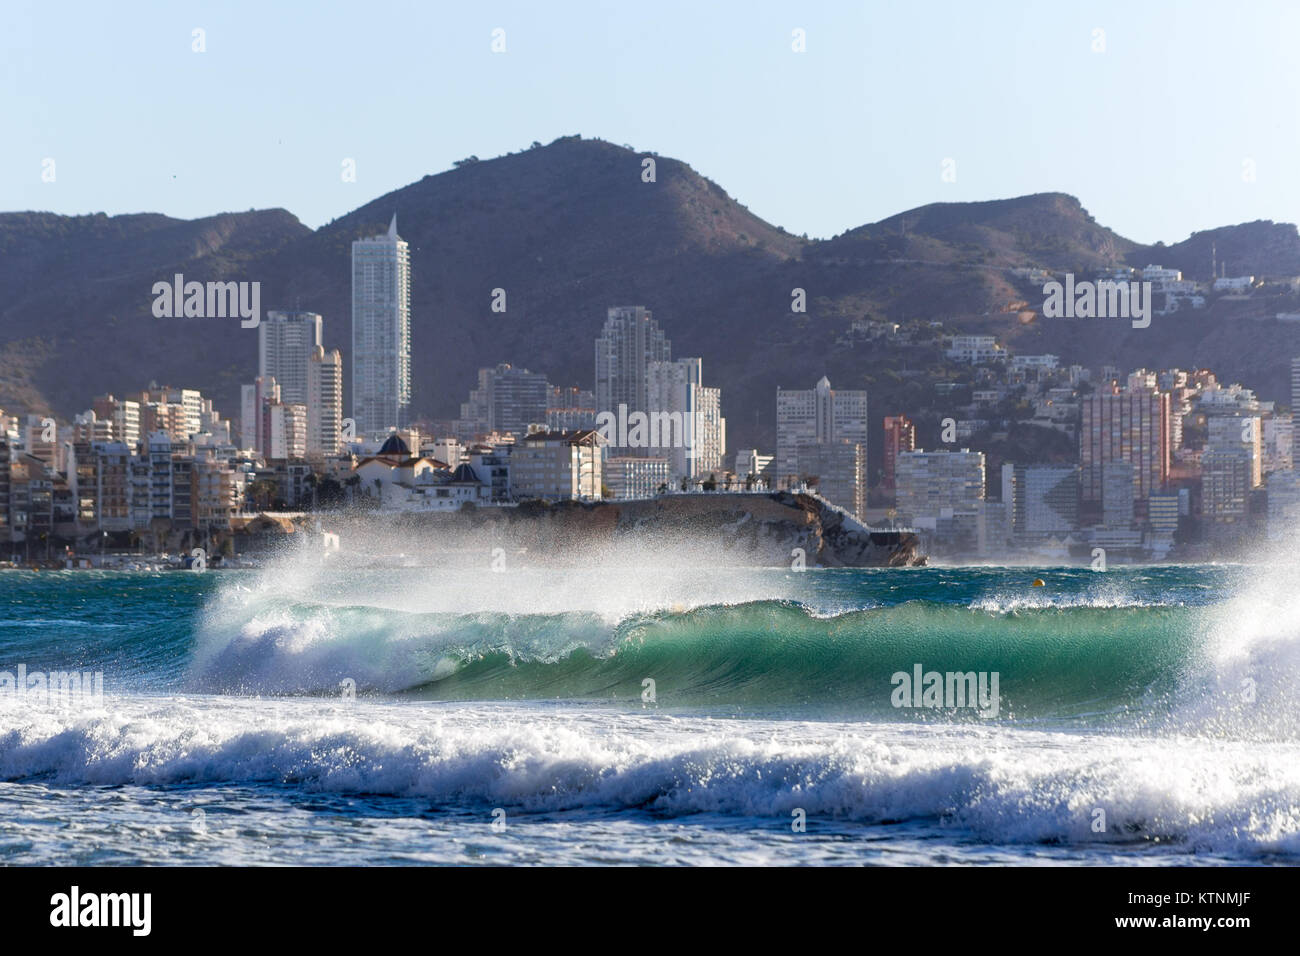 Benidorm, Costa Blanca, Spain, 27th December 2017. Storm Bruno sweeps across Spain and out to sea along the Costa Blanca coast. The crests of waves are whipped up and blown backwards as the wind blows. Credit: Mick Flynn/Alamy Live News Stock Photo